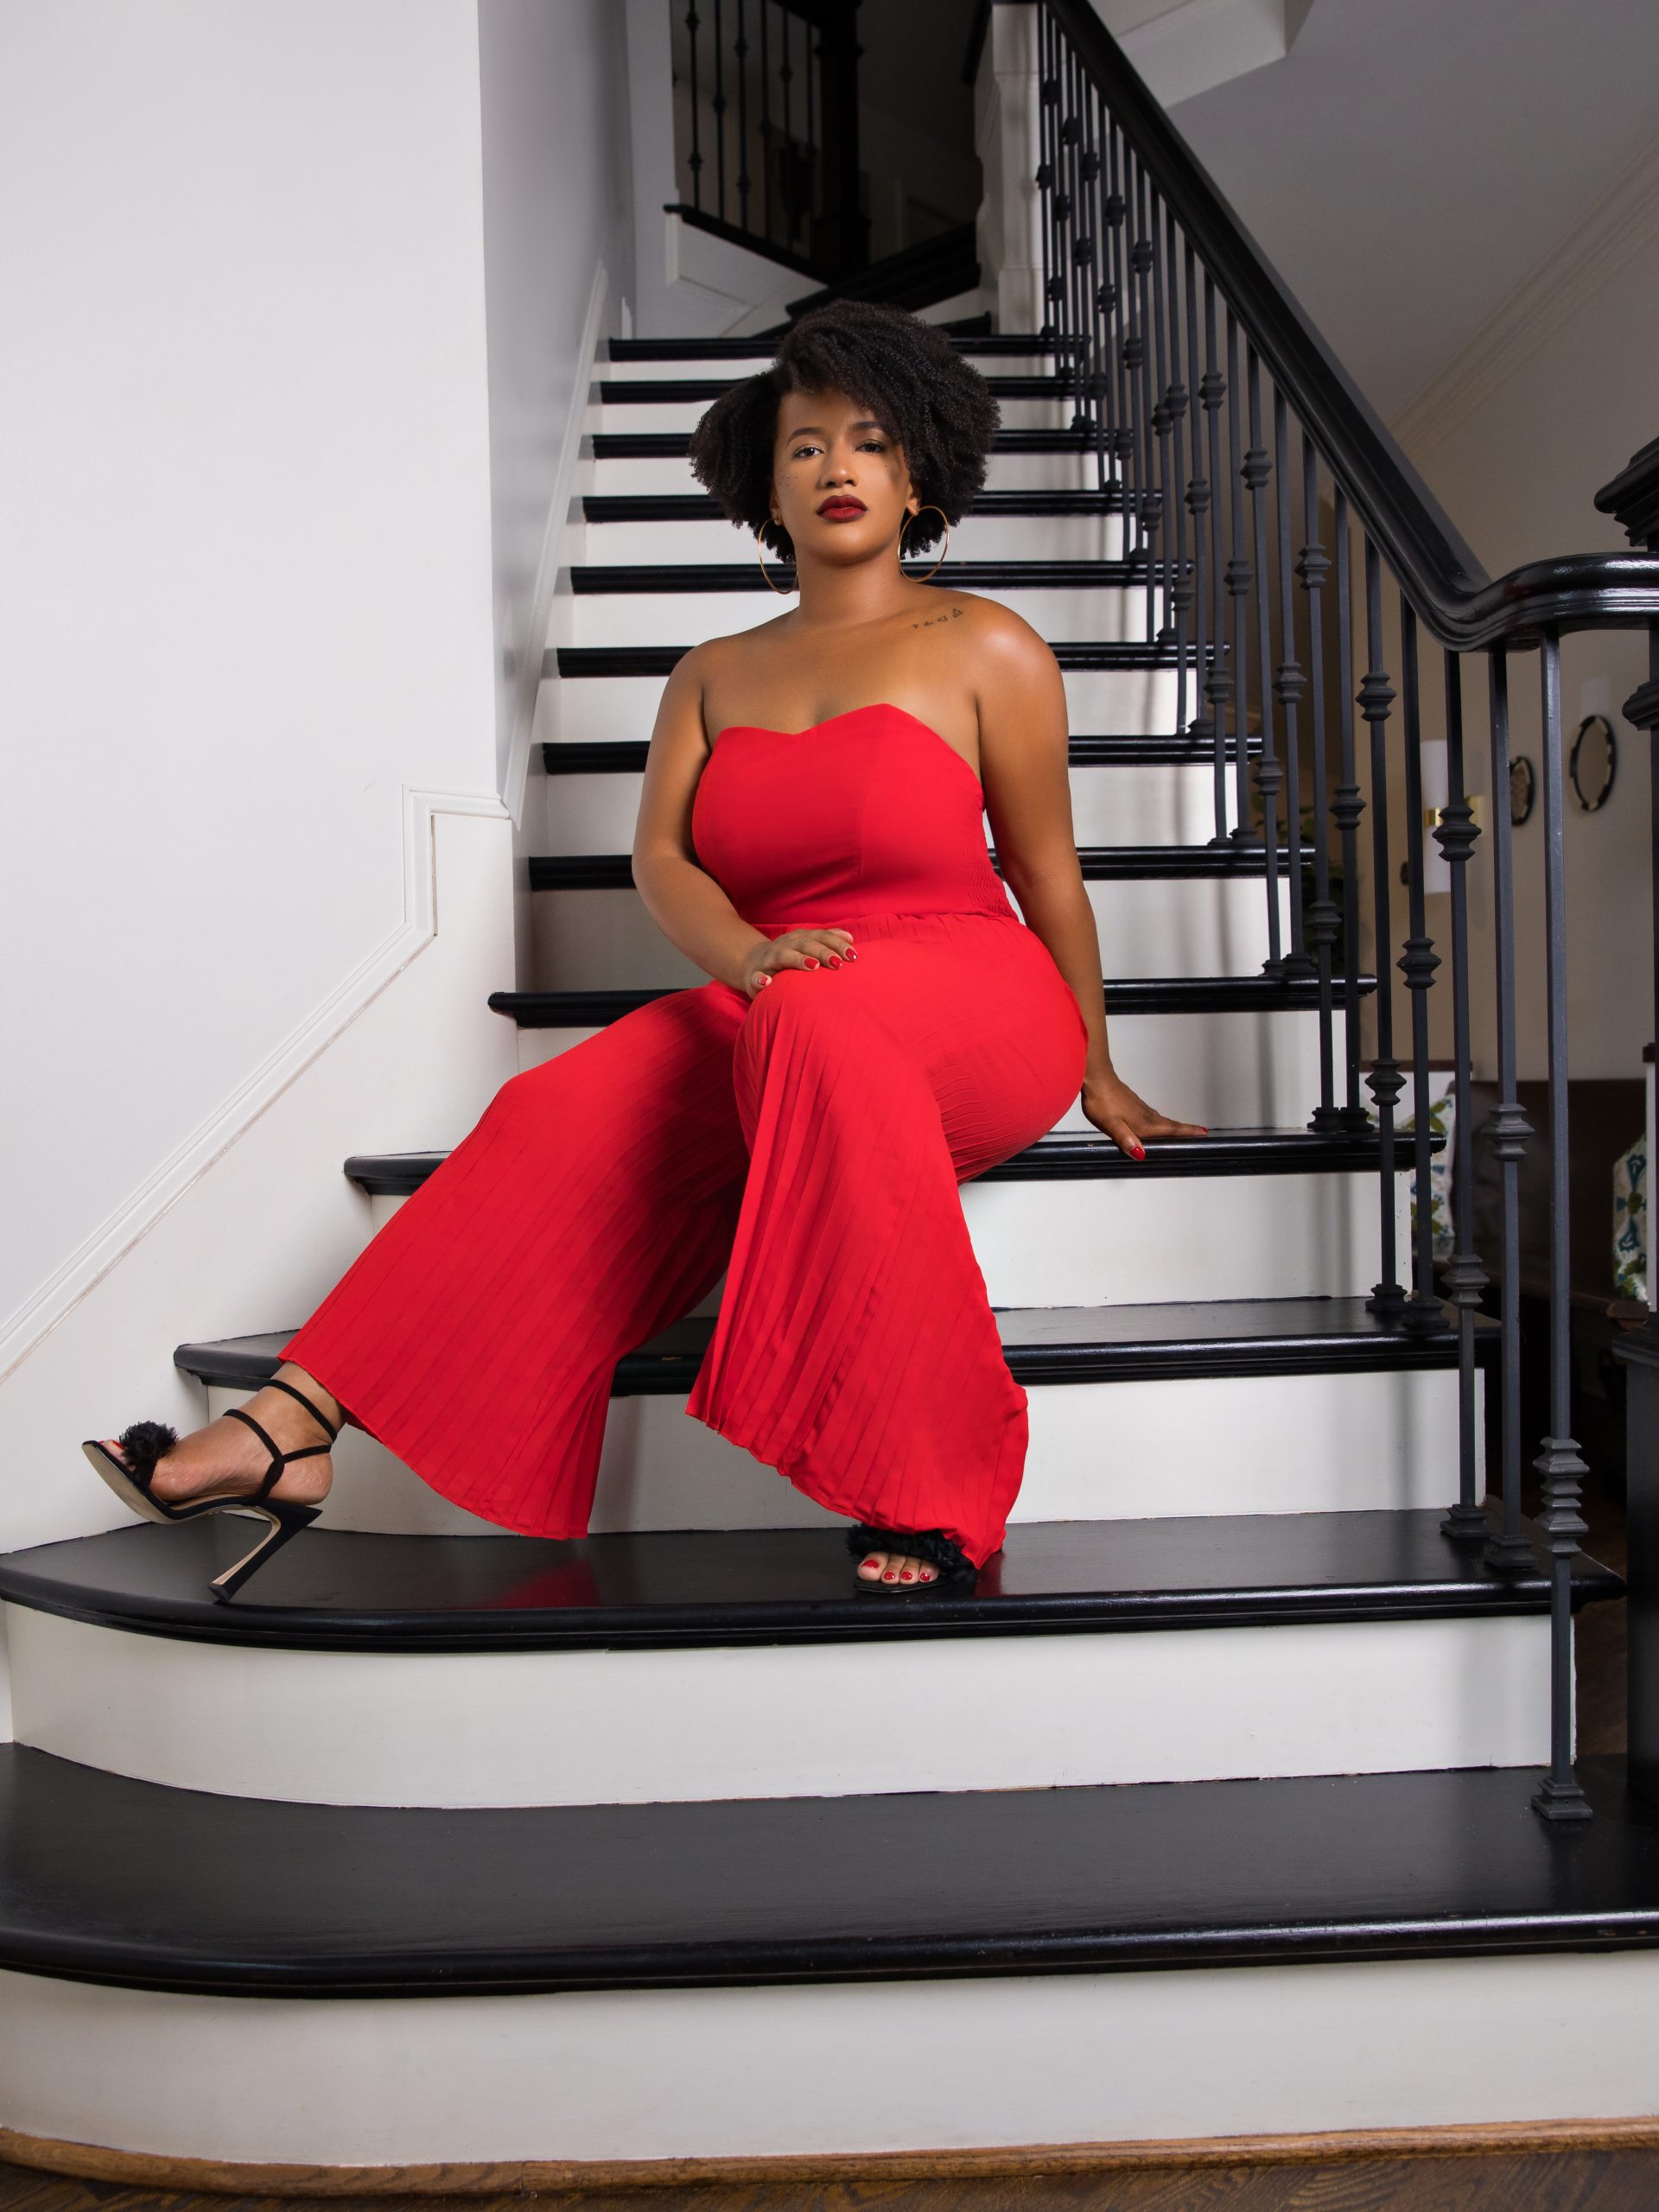 CurlMix Founder Kim Lewis Expands Her Haircare Empire With 4C ONLY 